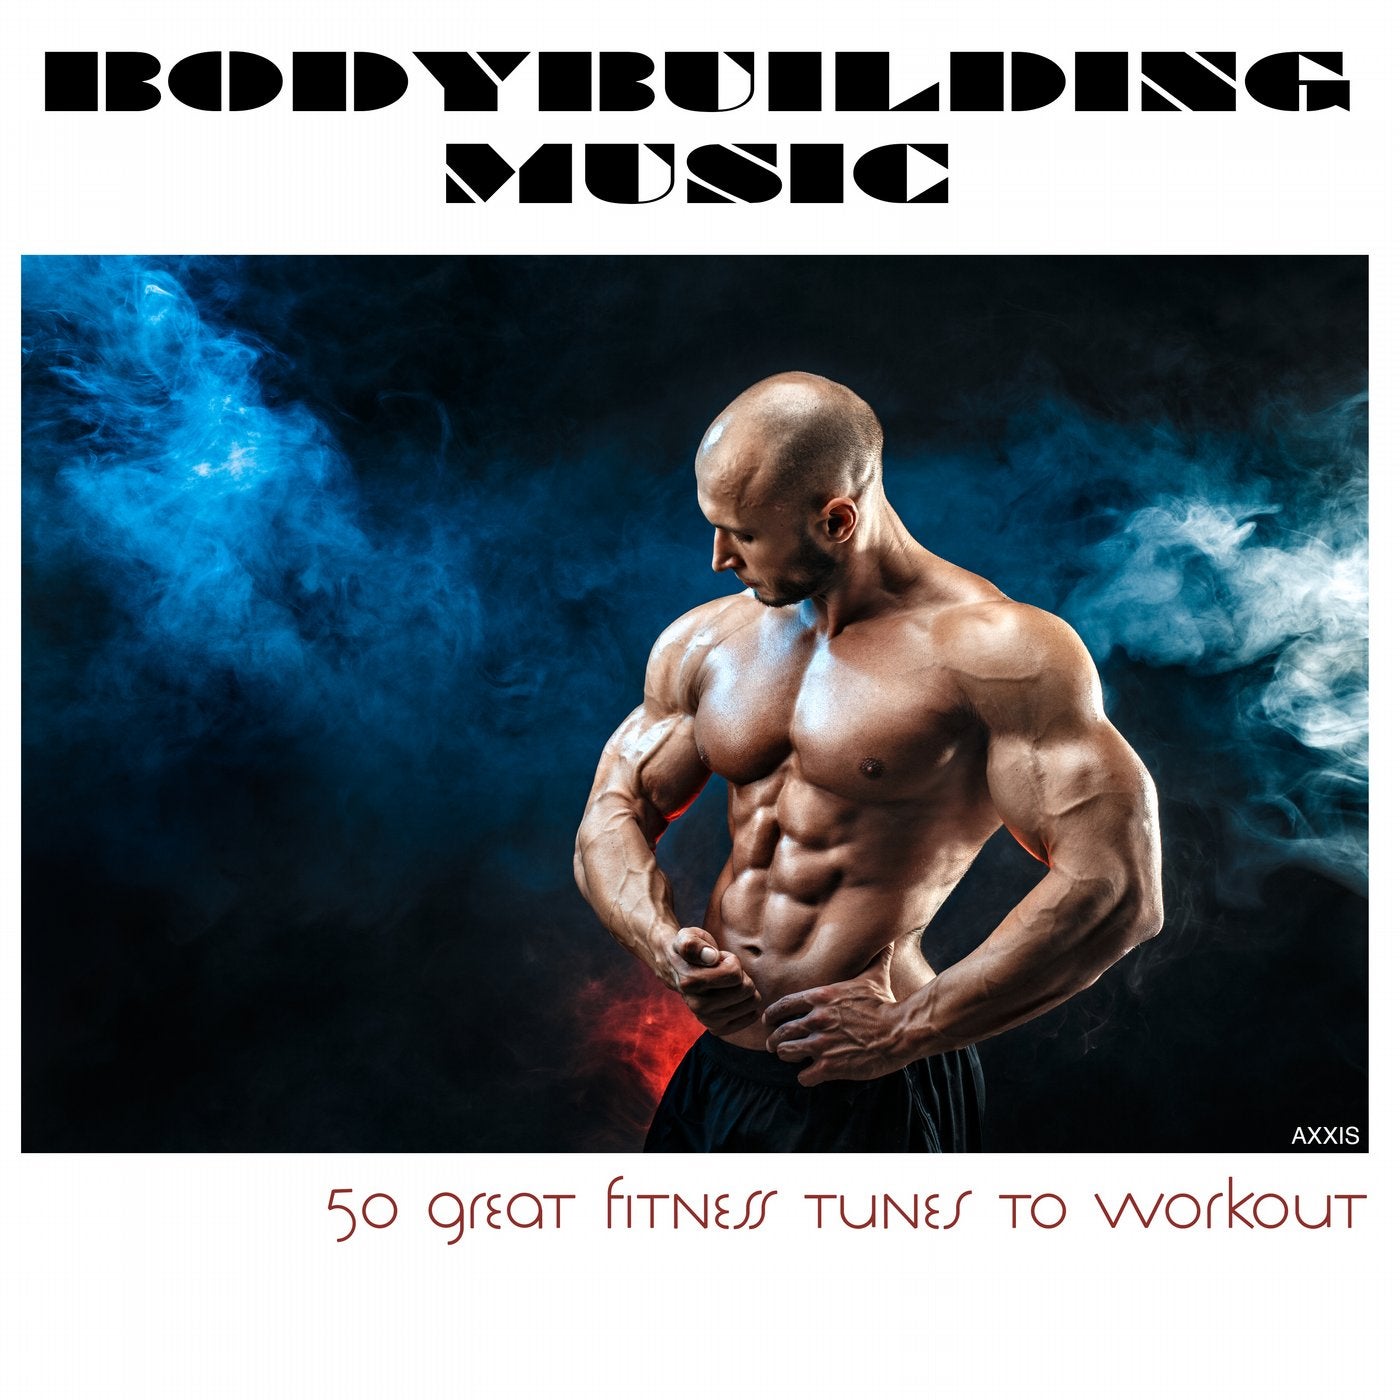 Bodybuilding Music 50 Great Fitness Tunes to Workout